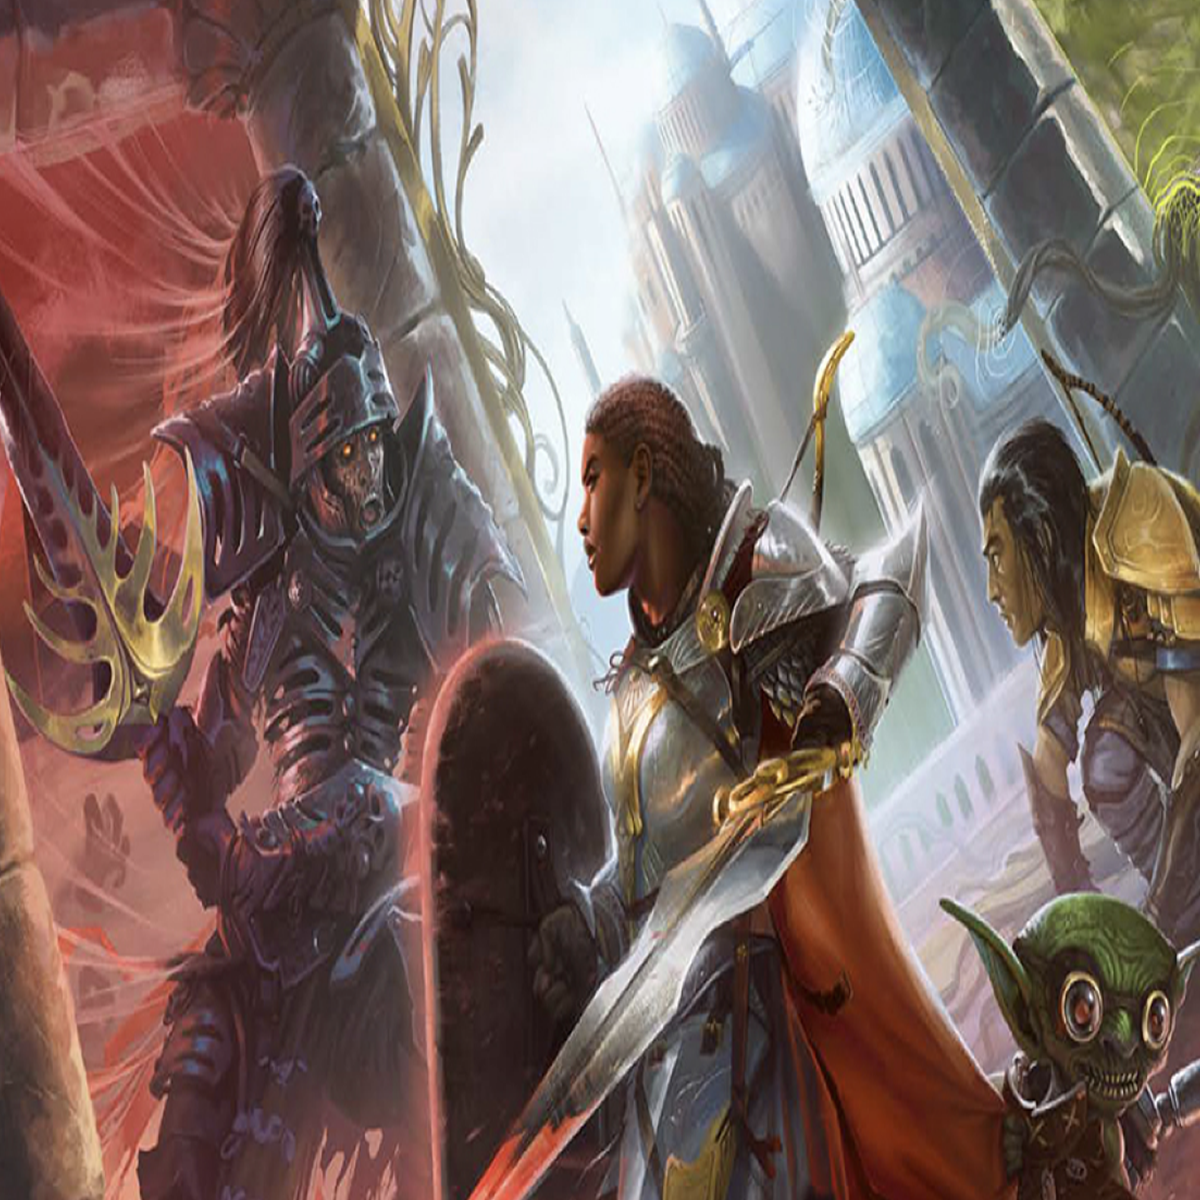 Pathfinder's creators Paizo offer over $400 worth of tabletop books for $25  in recent sale